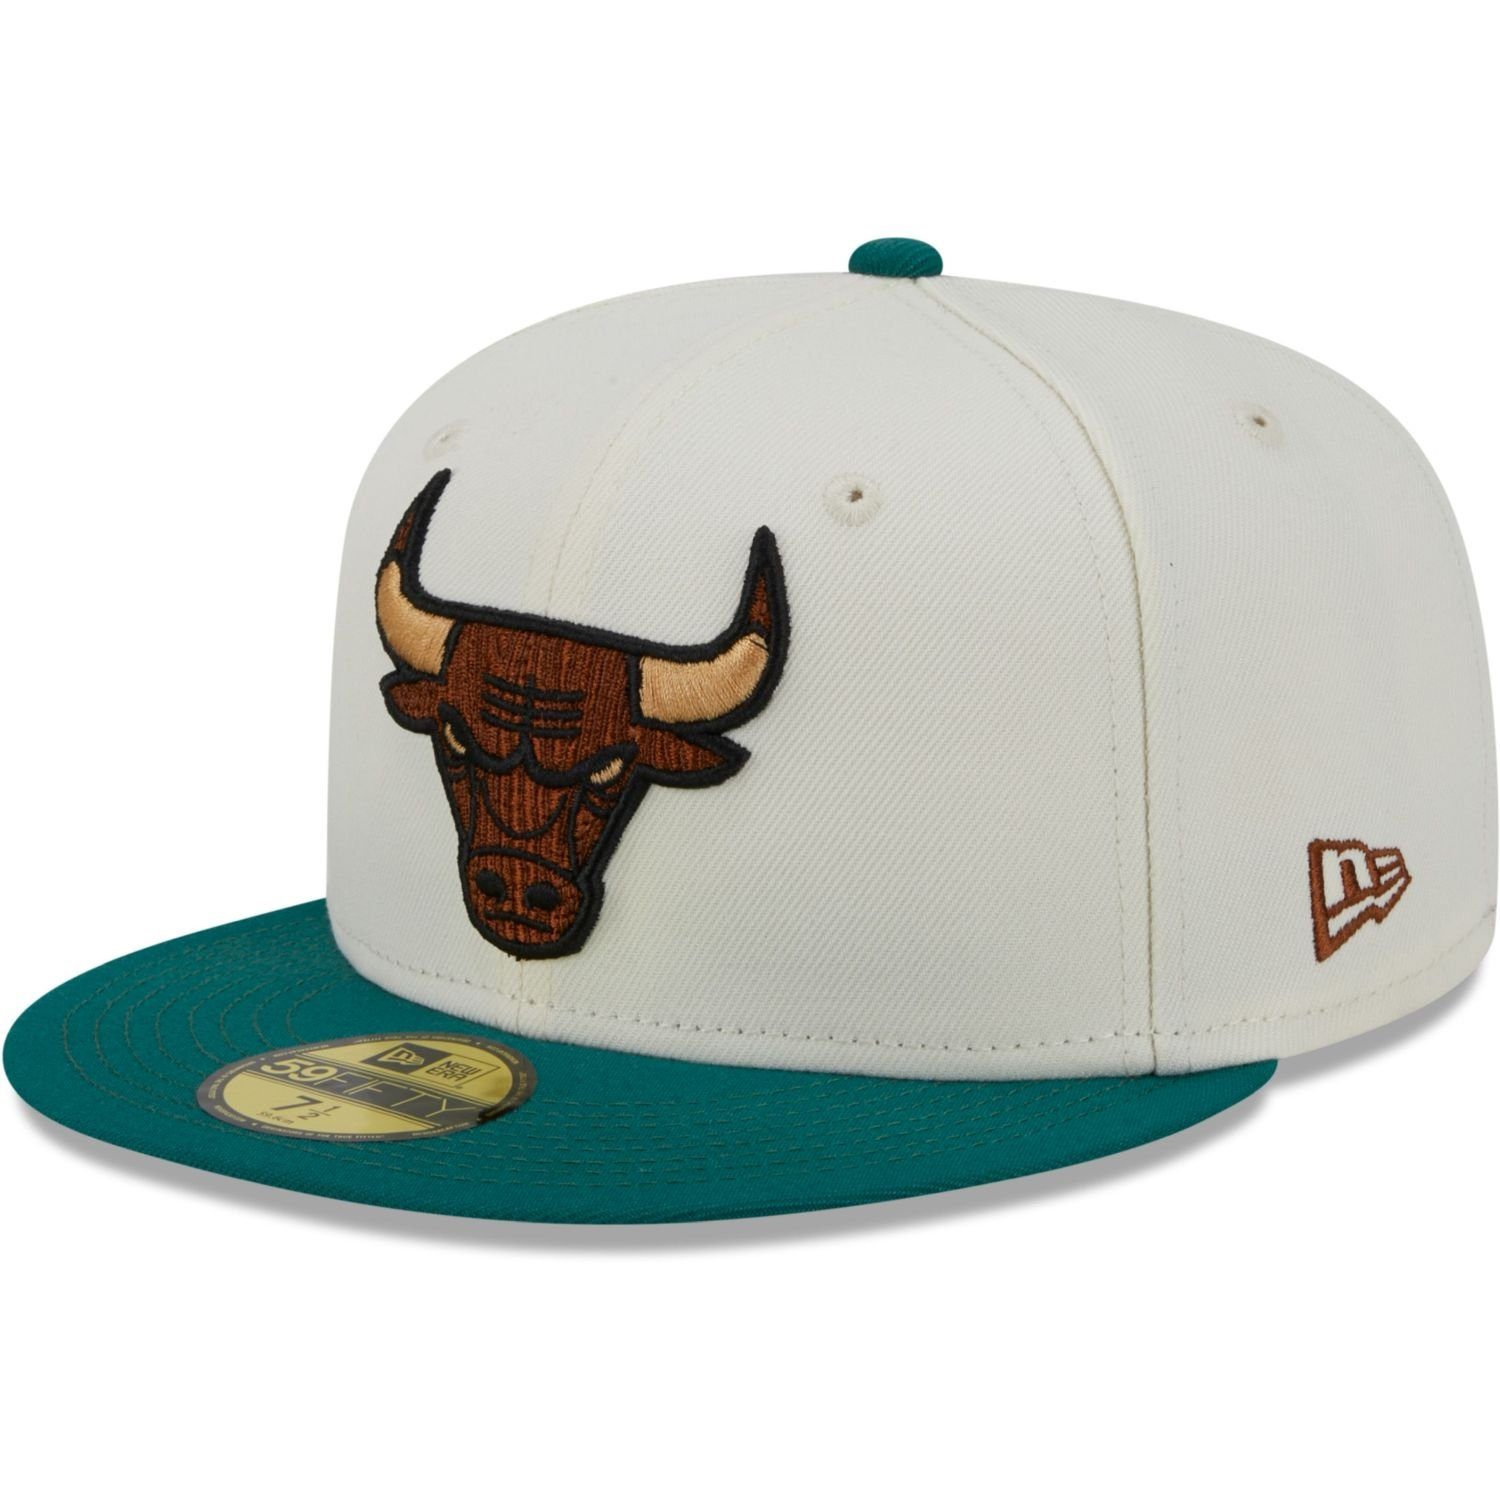 New Cap Chicago Era Fitted 59Fifty Bulls CAMP